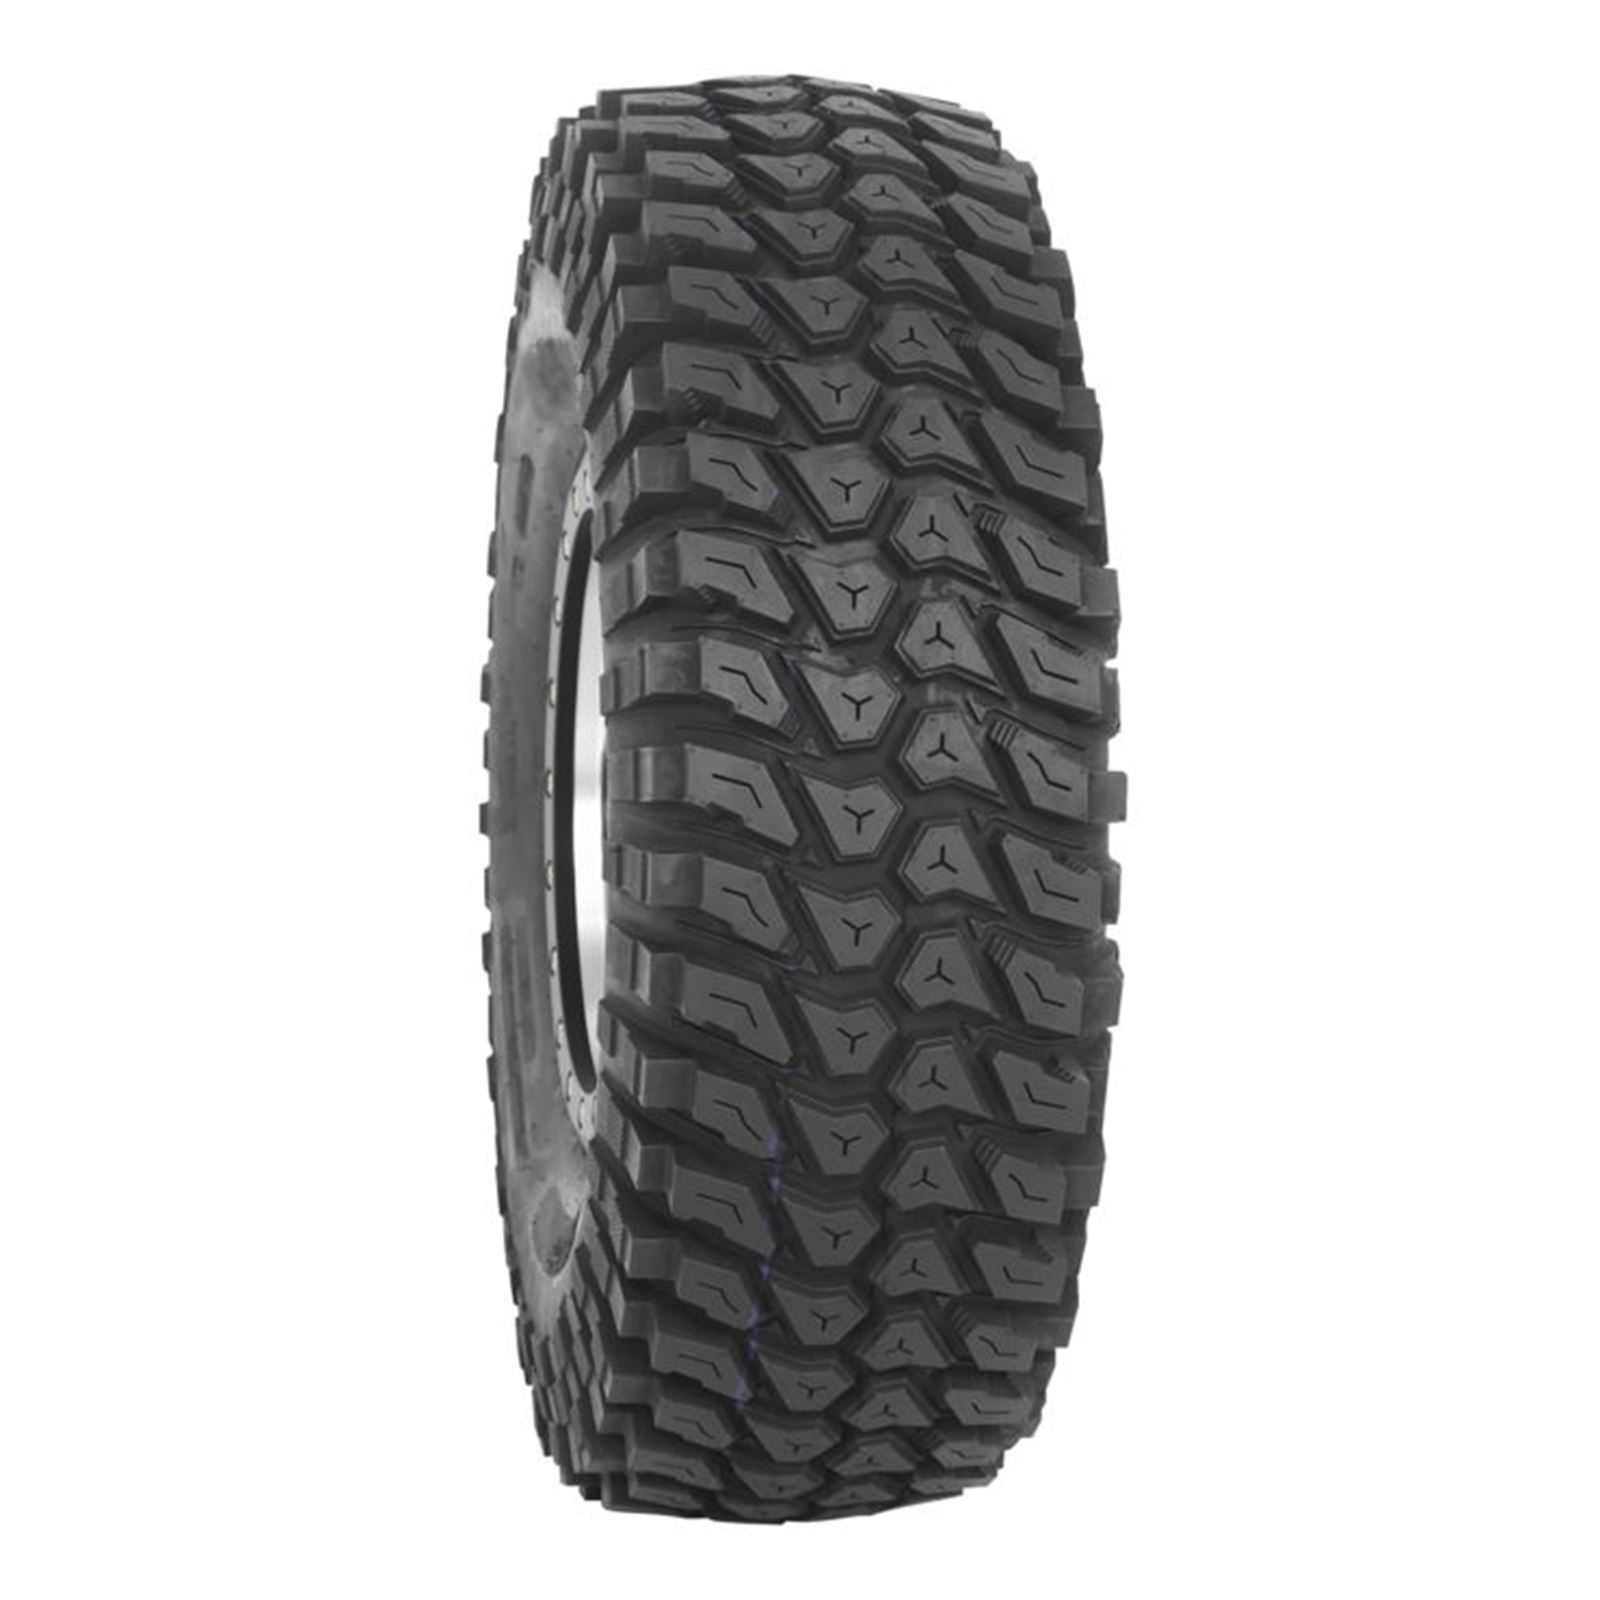 System 3 XCR350 Radial Tire - 33x10R-15, Radial, Front/Rear, 8-Ply